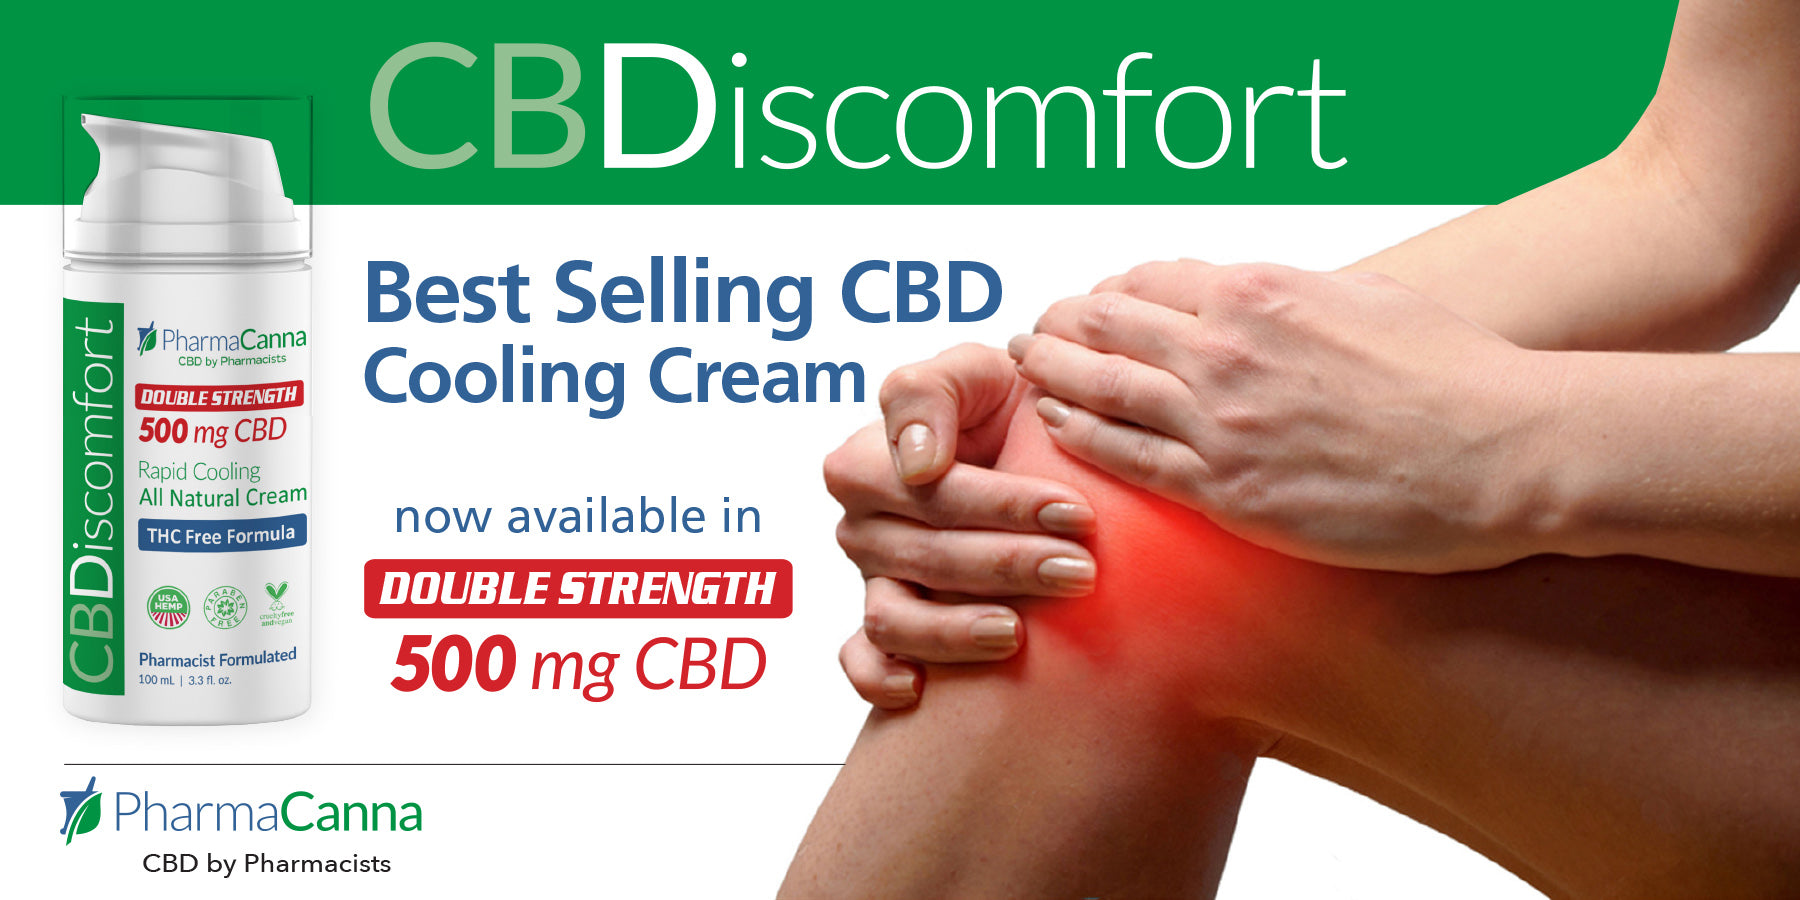 #1 CBD Cream now available in double strength. Double the effect for joint and muscles with inflammation or arthritis.